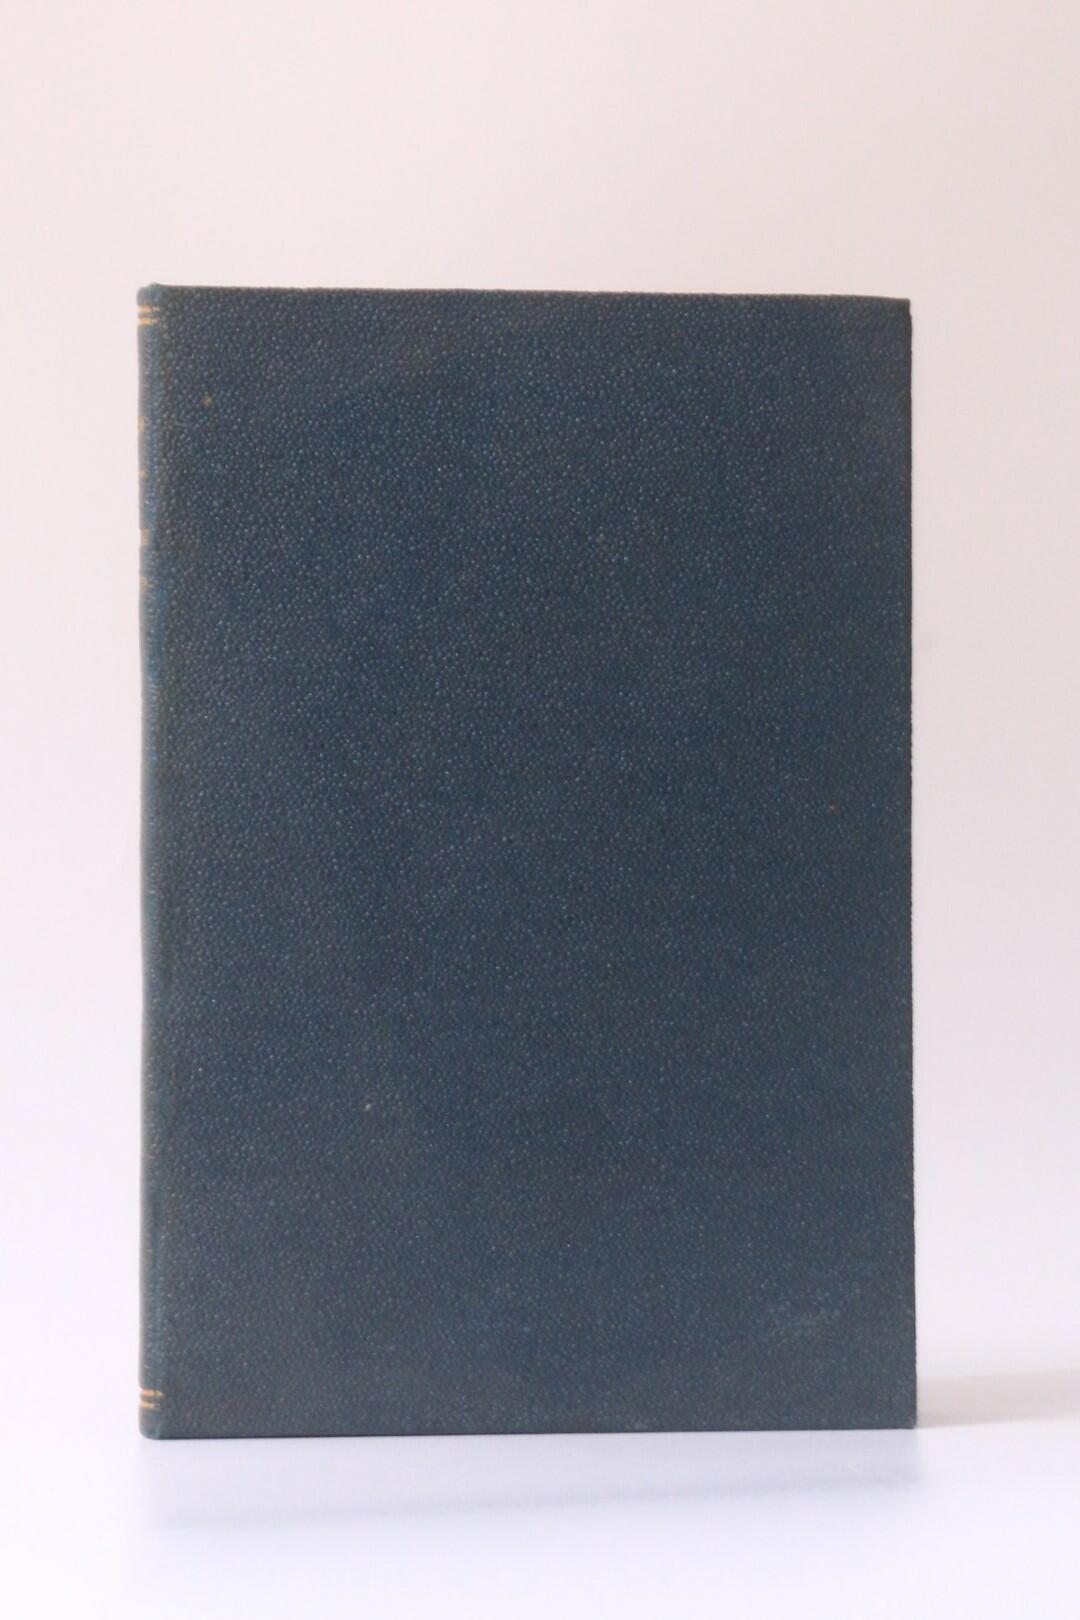 William Delisle Hay - The Doom of the Great City Being the Narrative of a Survivor Written A.D. 1942 - Newman & Co., n.d. [1880], First Edition.